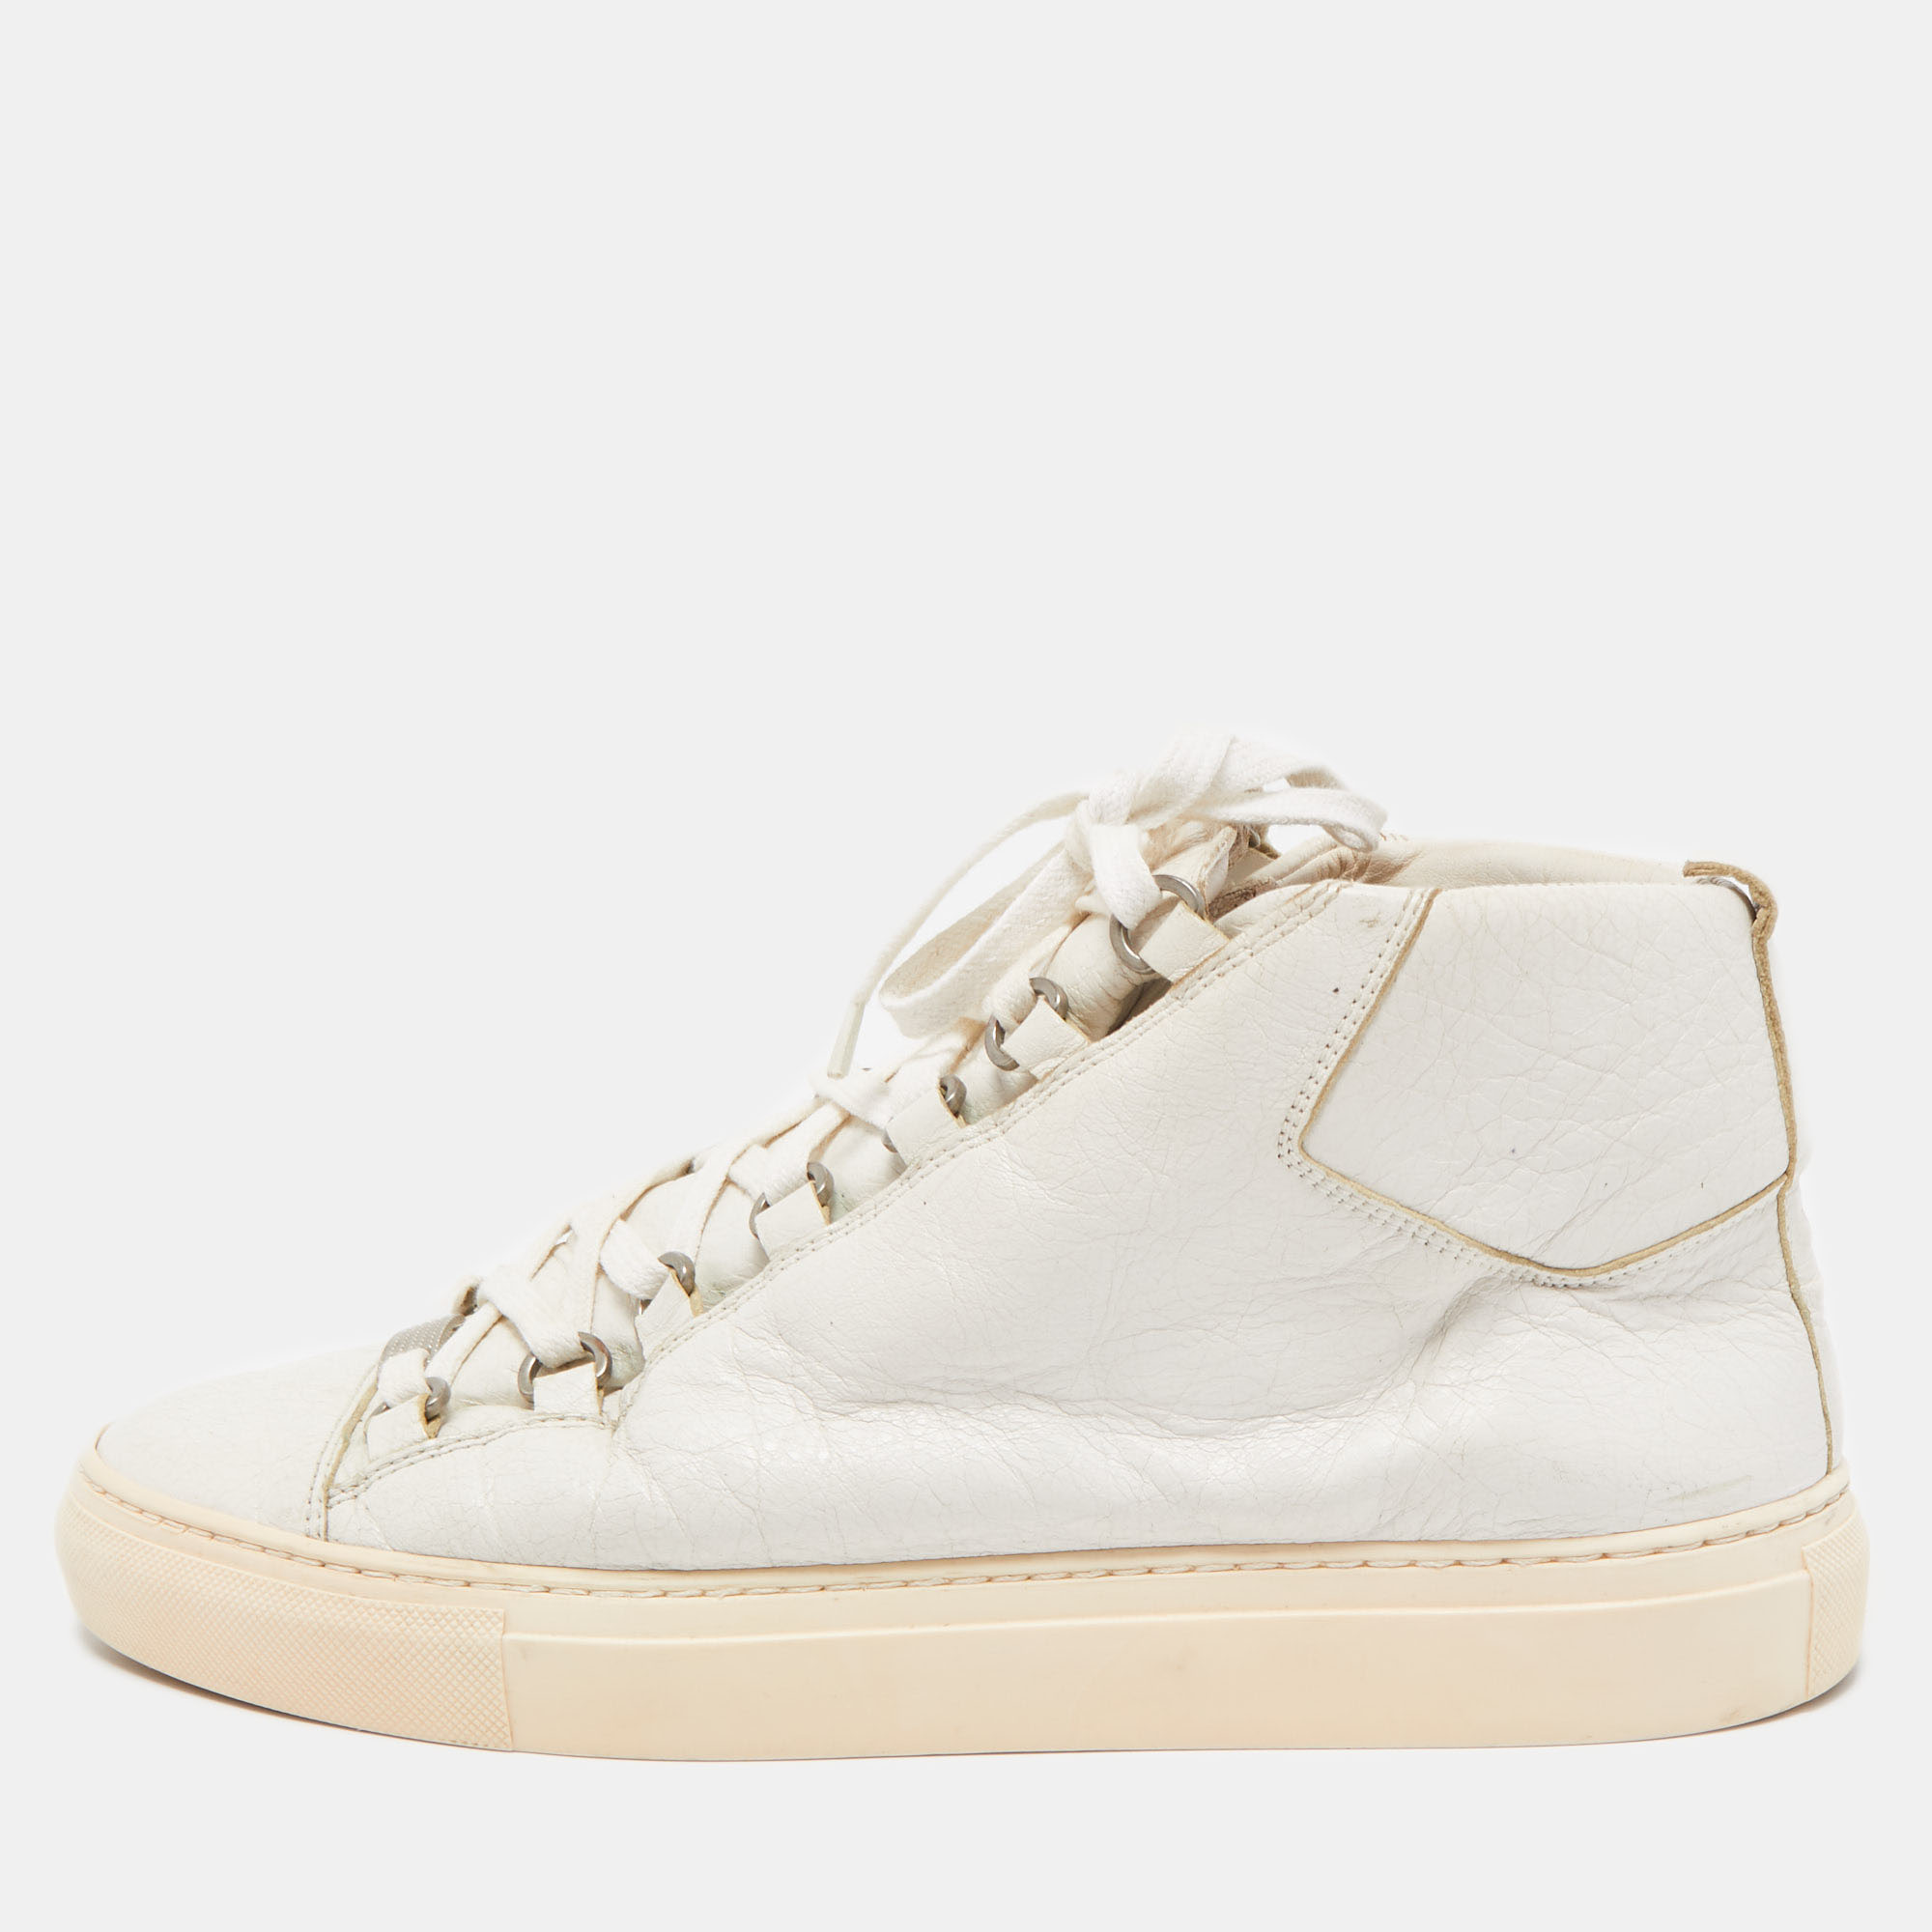 Pre-owned Balenciaga White Leather Arena High Top Trainers Size 40